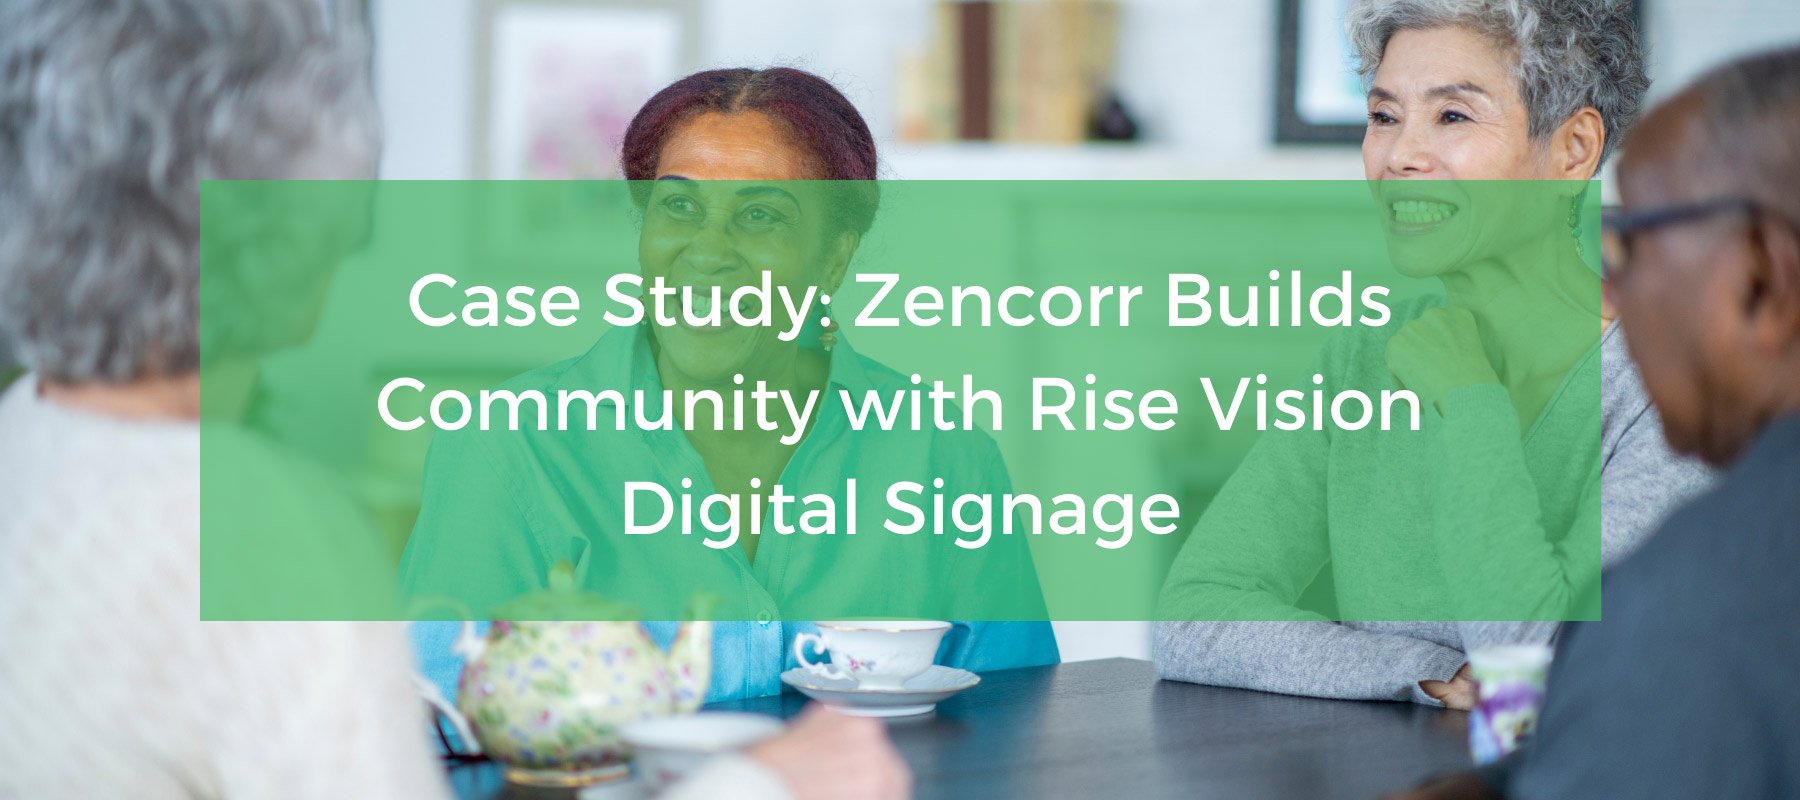 Zencorr Builds Community for 350 Residents with Digital Signage